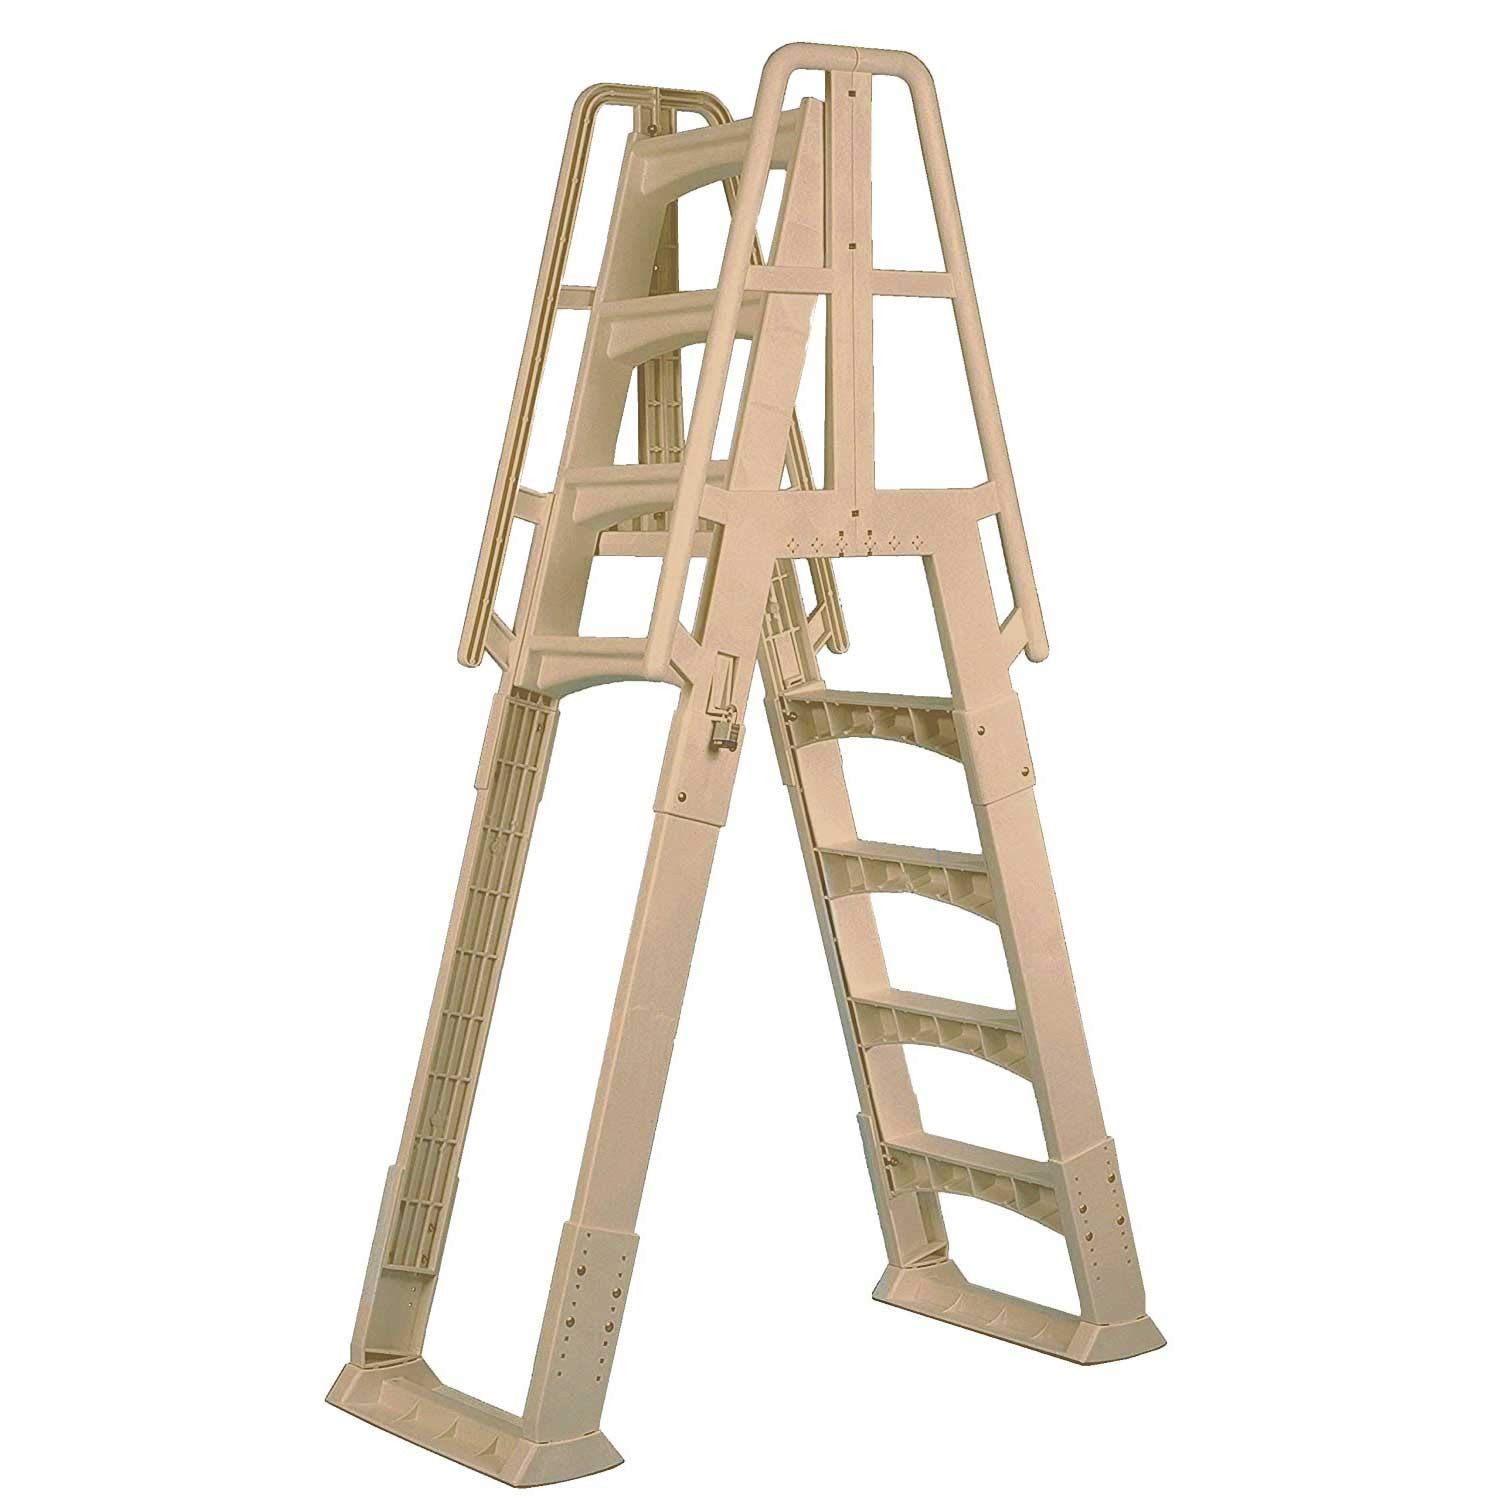 Above Ground Pool Ladder
 Best Ground Pool Ladders and Staircases Reviews 2019